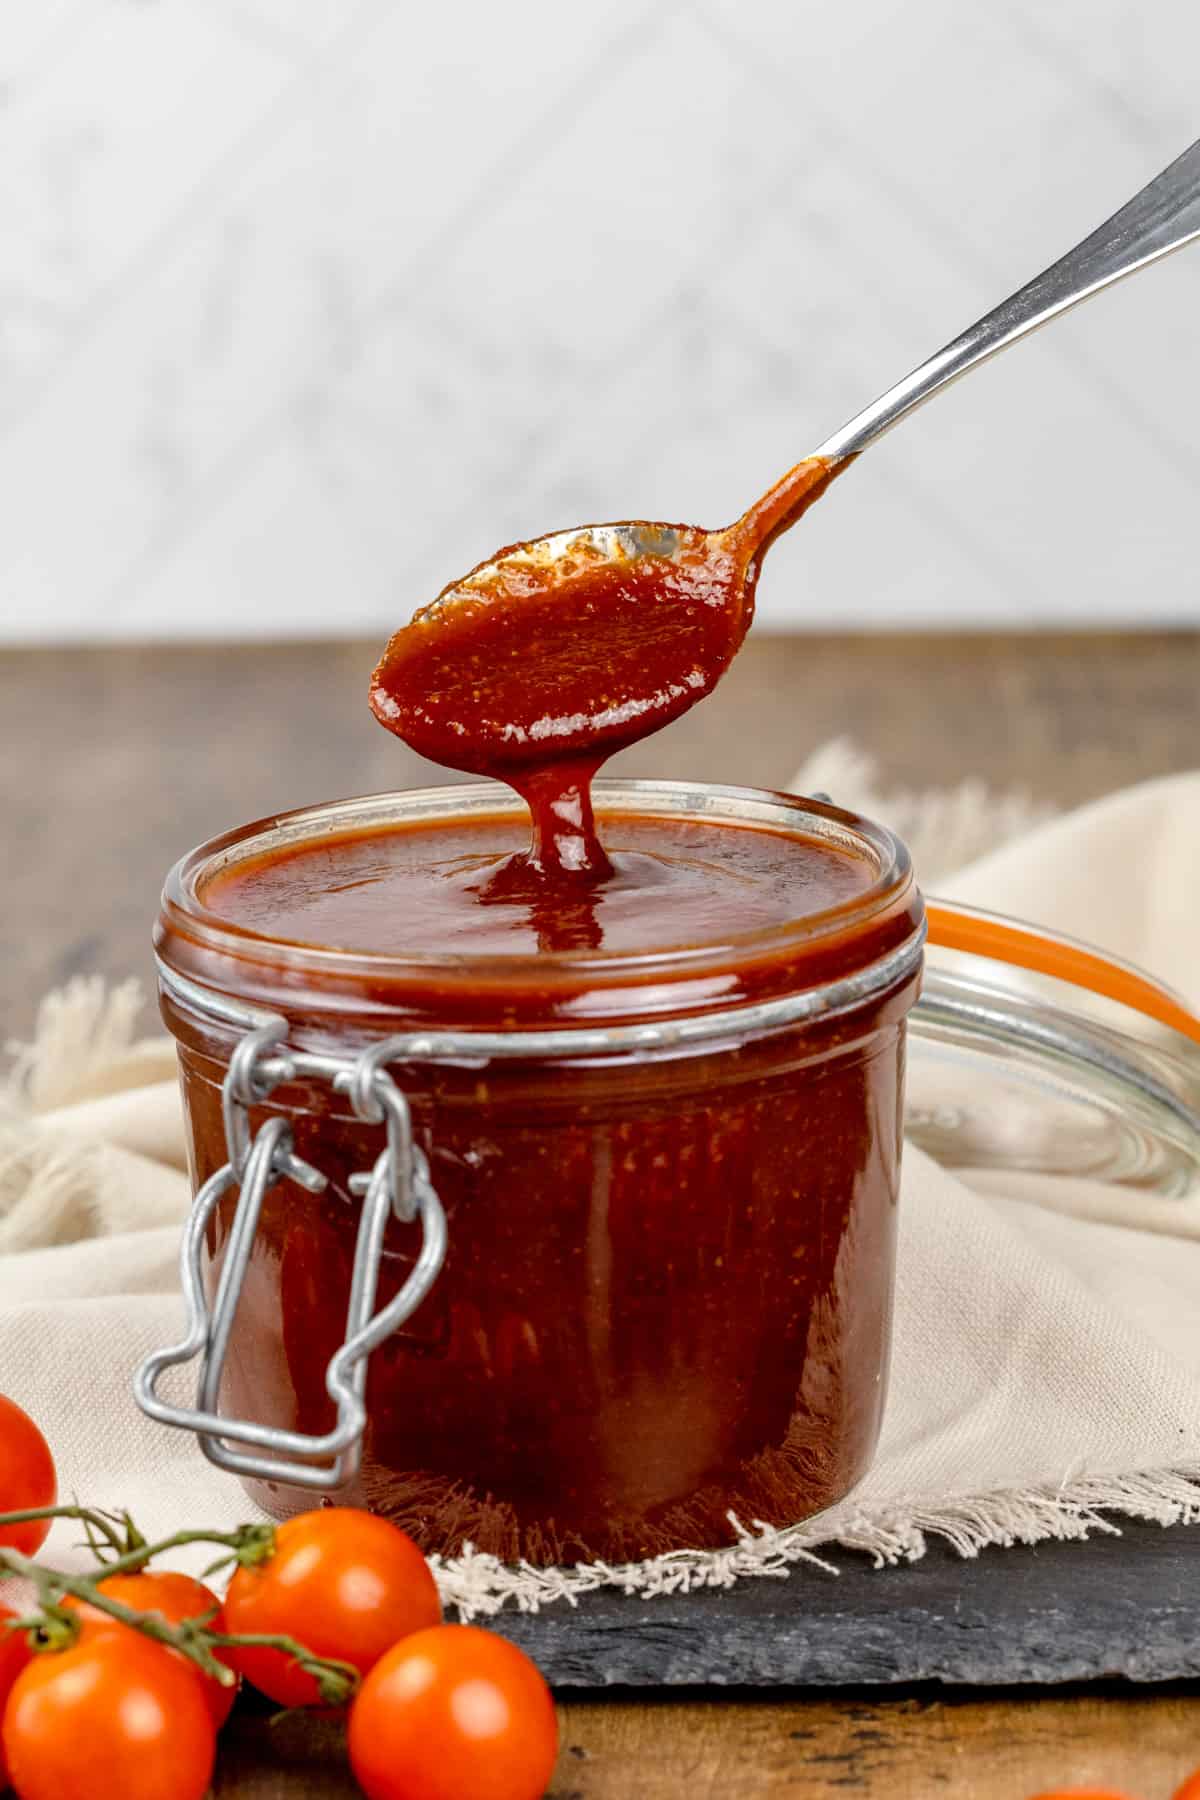 A glass jar is filled with vegan bbq sauce. A silver spoon has pulled up a spoonful of sauce and it is dripping back down into the jar. Tiny tomatoes are blurred in the foreground.